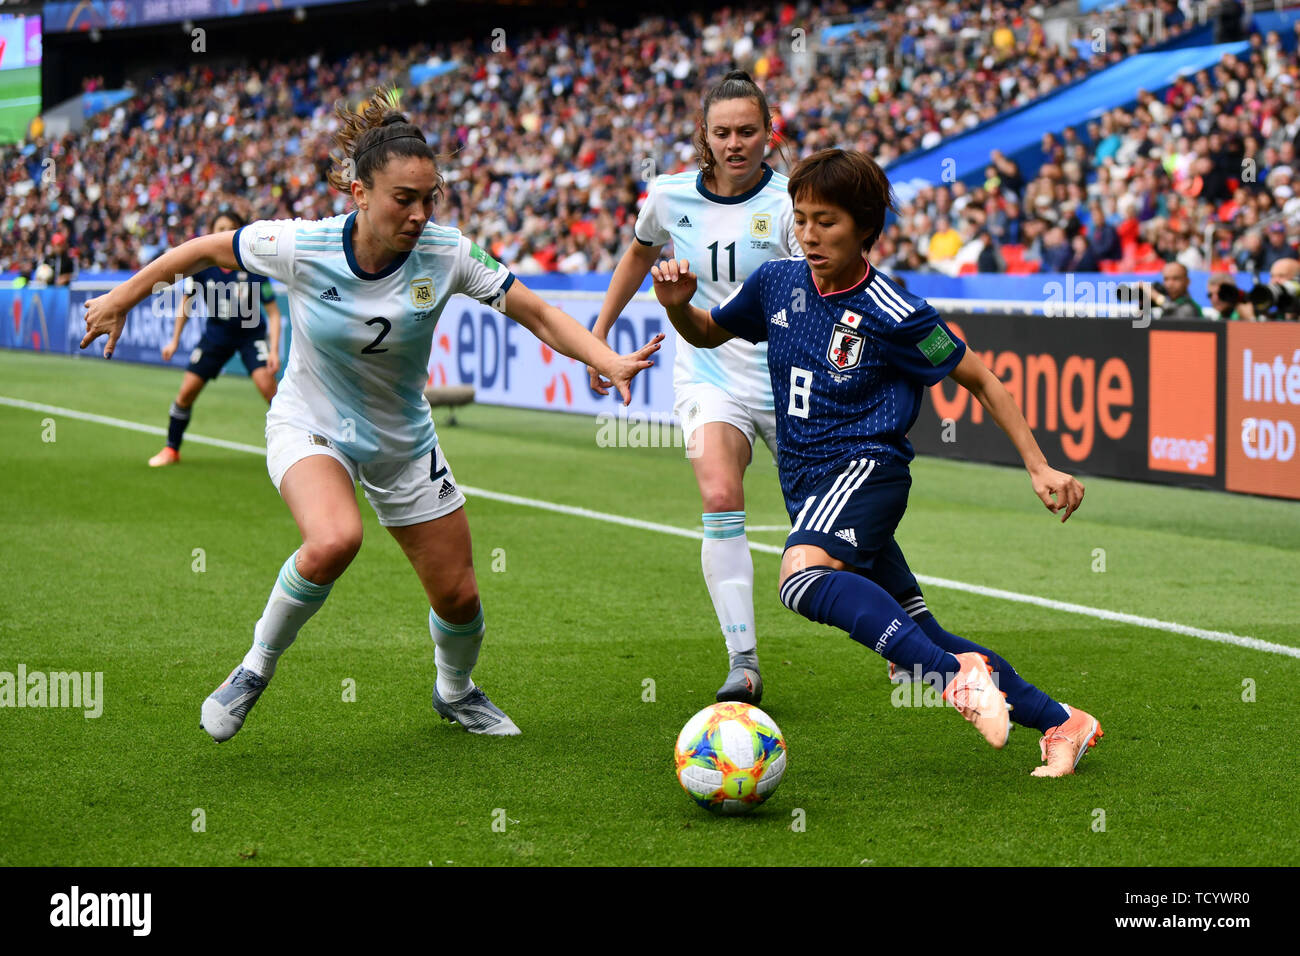 10 june 2019 Paris, France Soccer Women's World Cup France 2019: Argentina v Japan   Agustina Barroso (Argentinien) (2) tries to stop Mana Iwabuchi (Japan) (8) Stock Photo